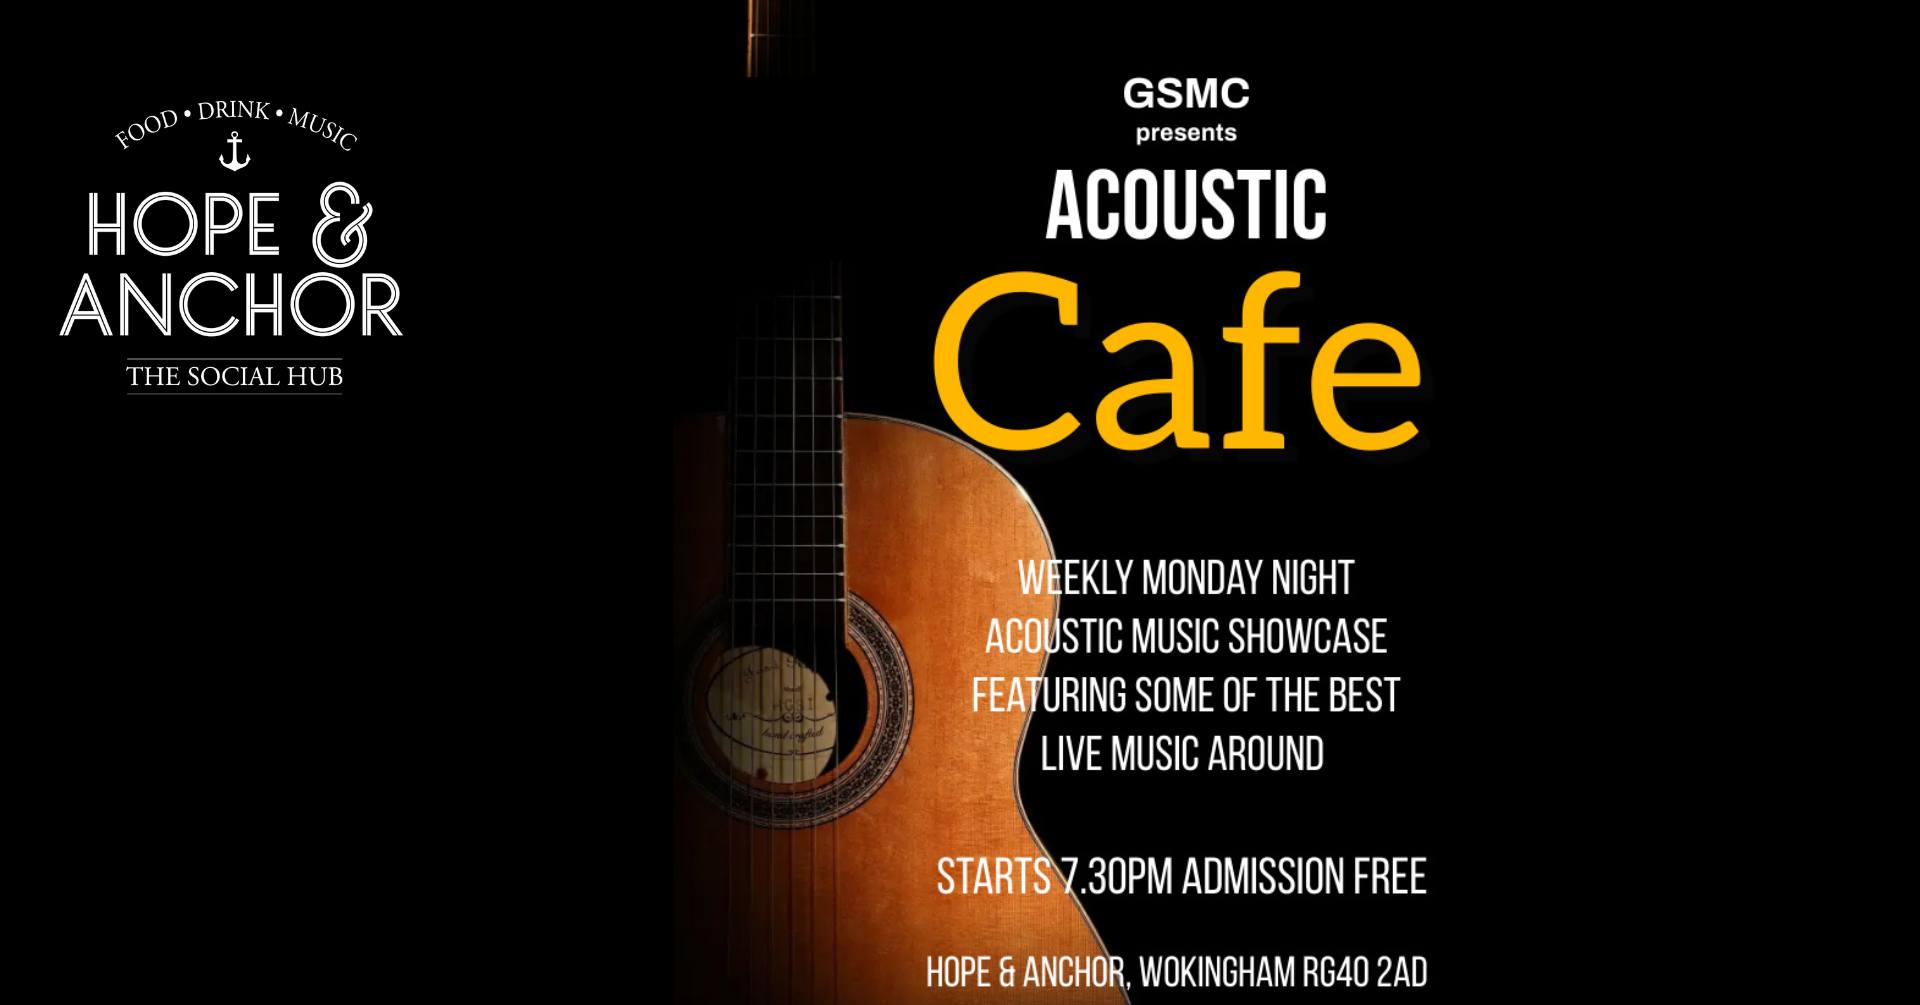 Hope & Anchor Acoustic Cafe